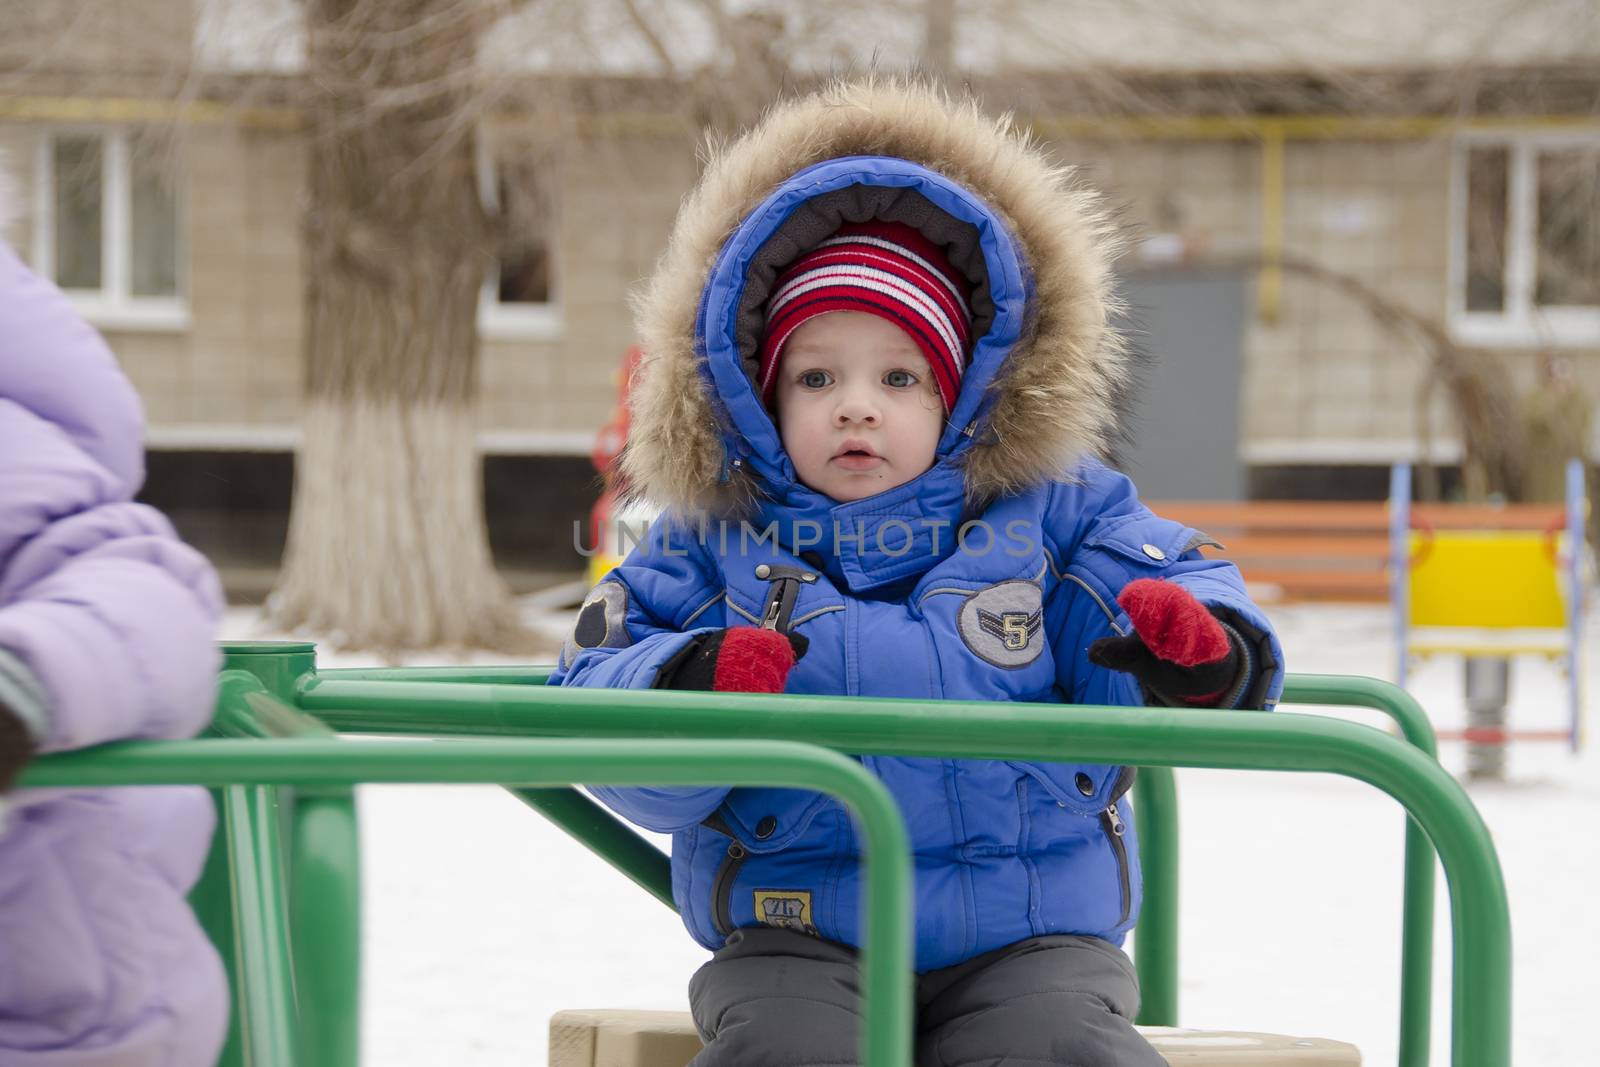 A little girl riding a little merry-go-round on the Playground. The girl is afraid of.